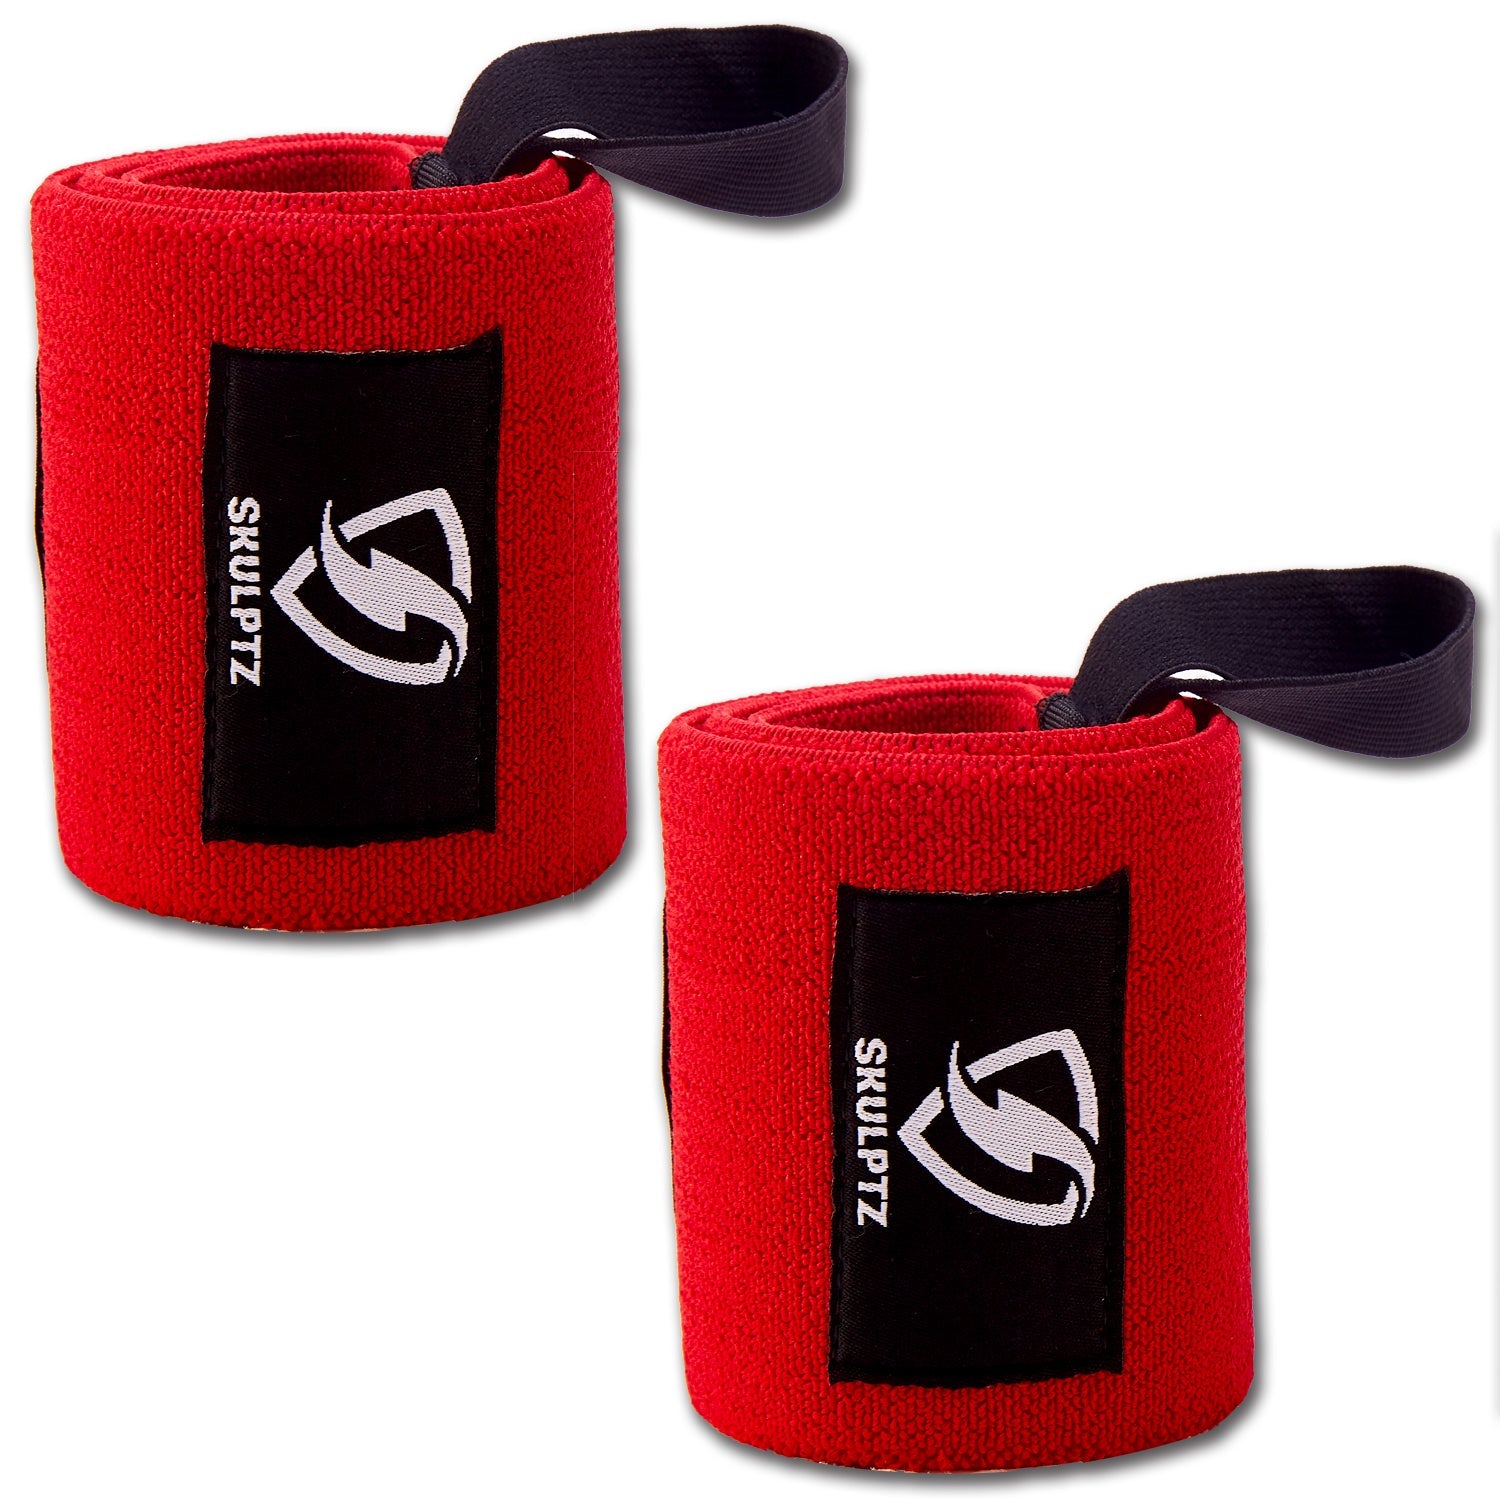 Monster Competition Grade Wrist Wraps 25 Inches Red - skulptz